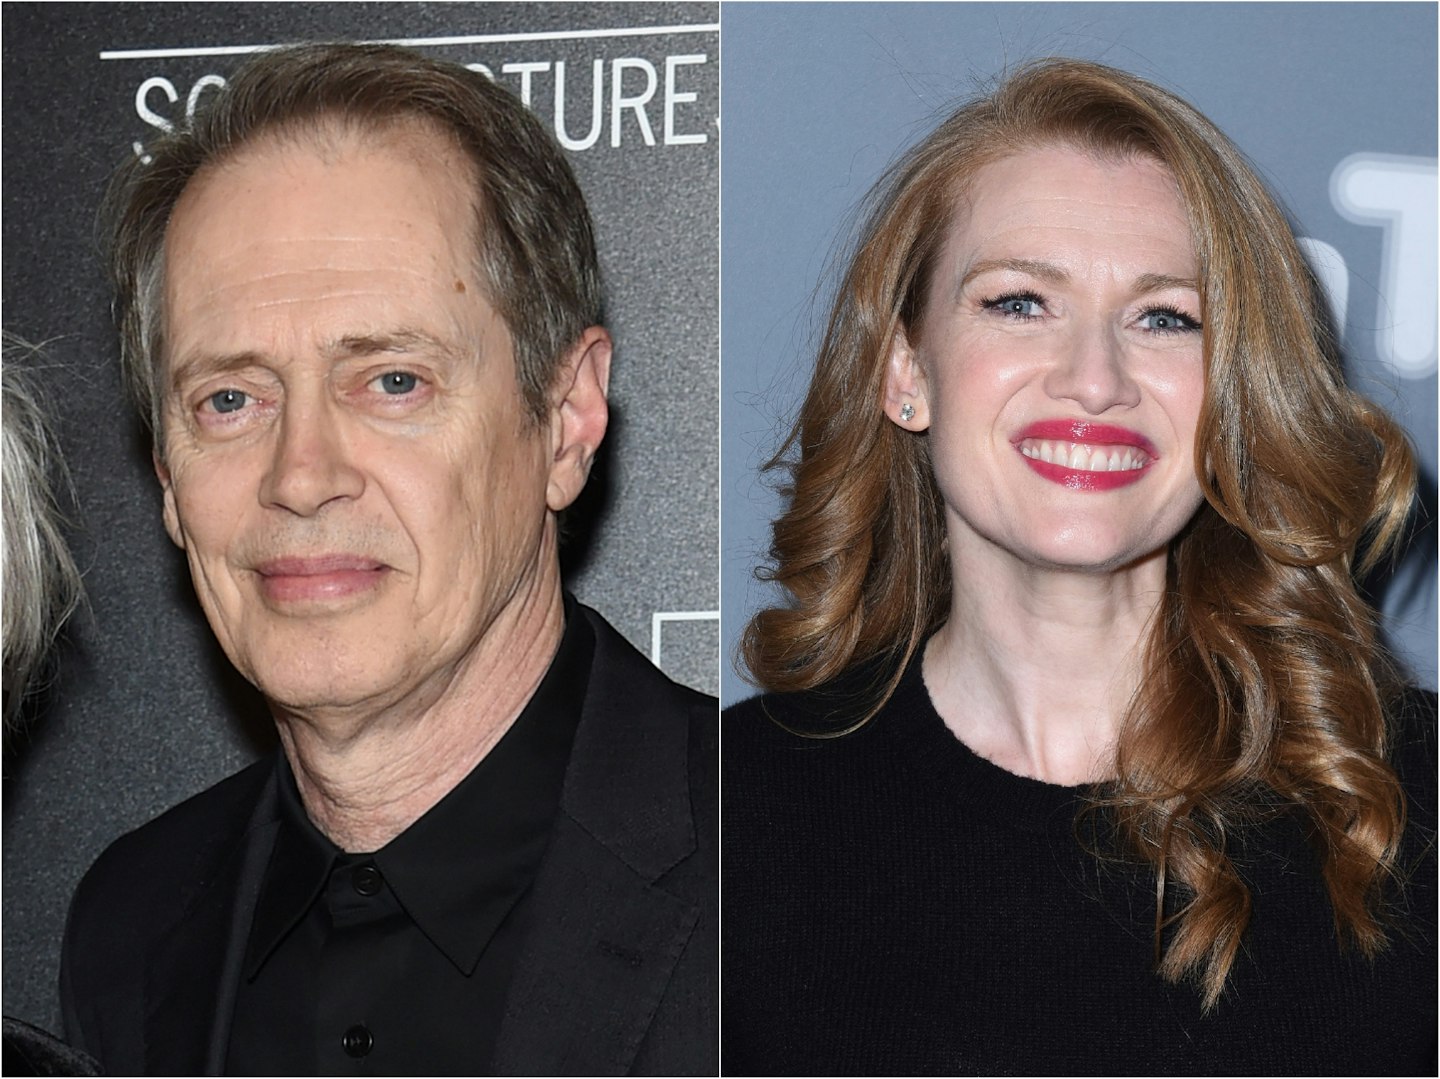 Steve Buscemi and Mireille Enos